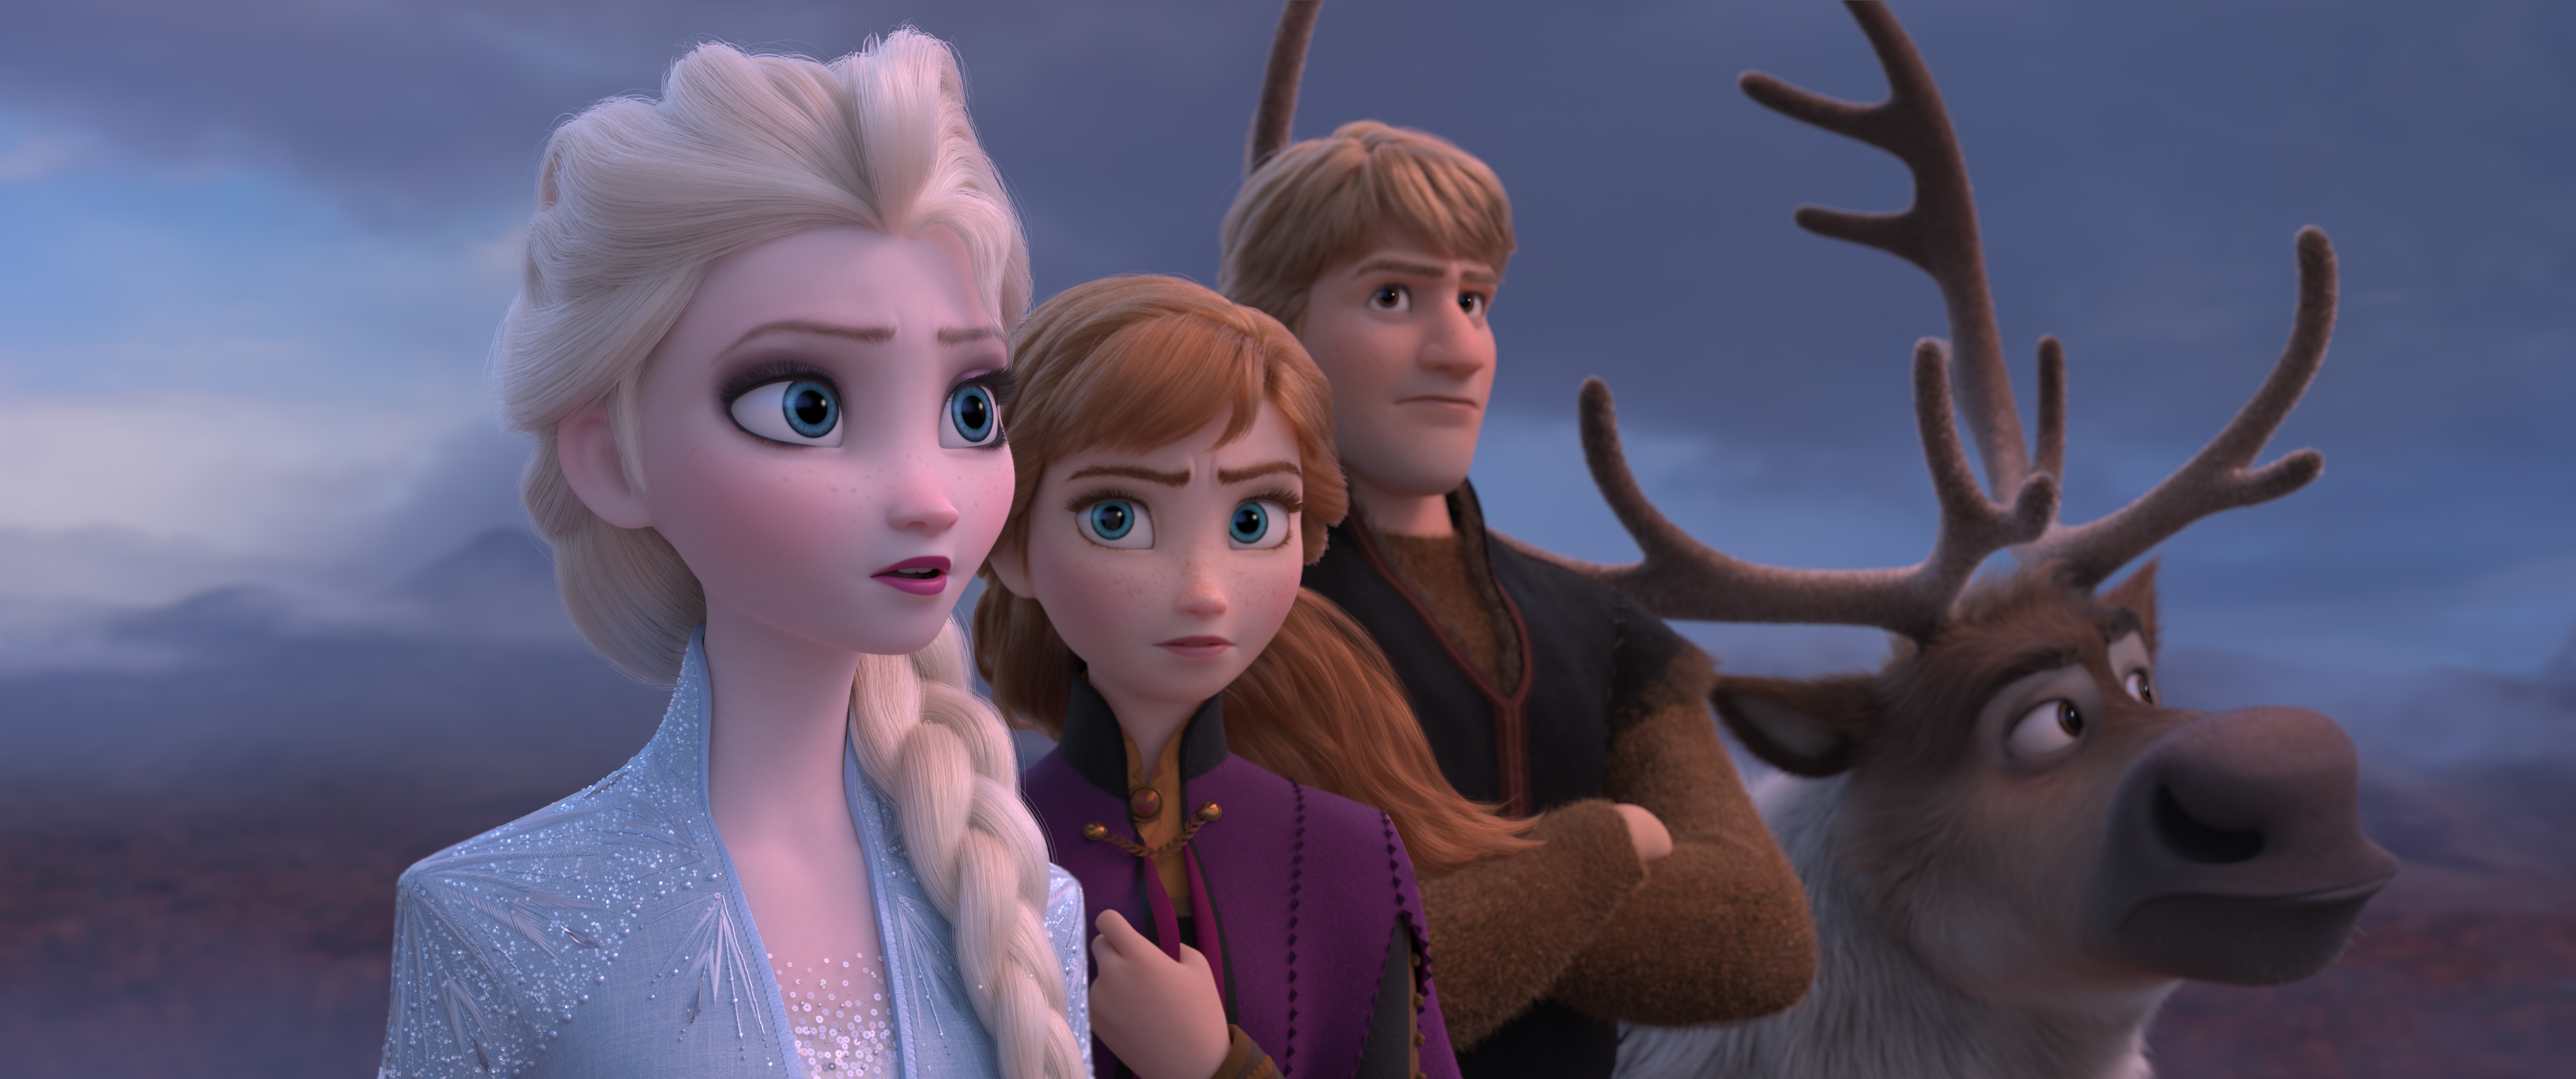 Princesses Elsa and Anna and their buddies Kristoff and Sven the reindeer stand together in Frozen II, looking off toward the horizon